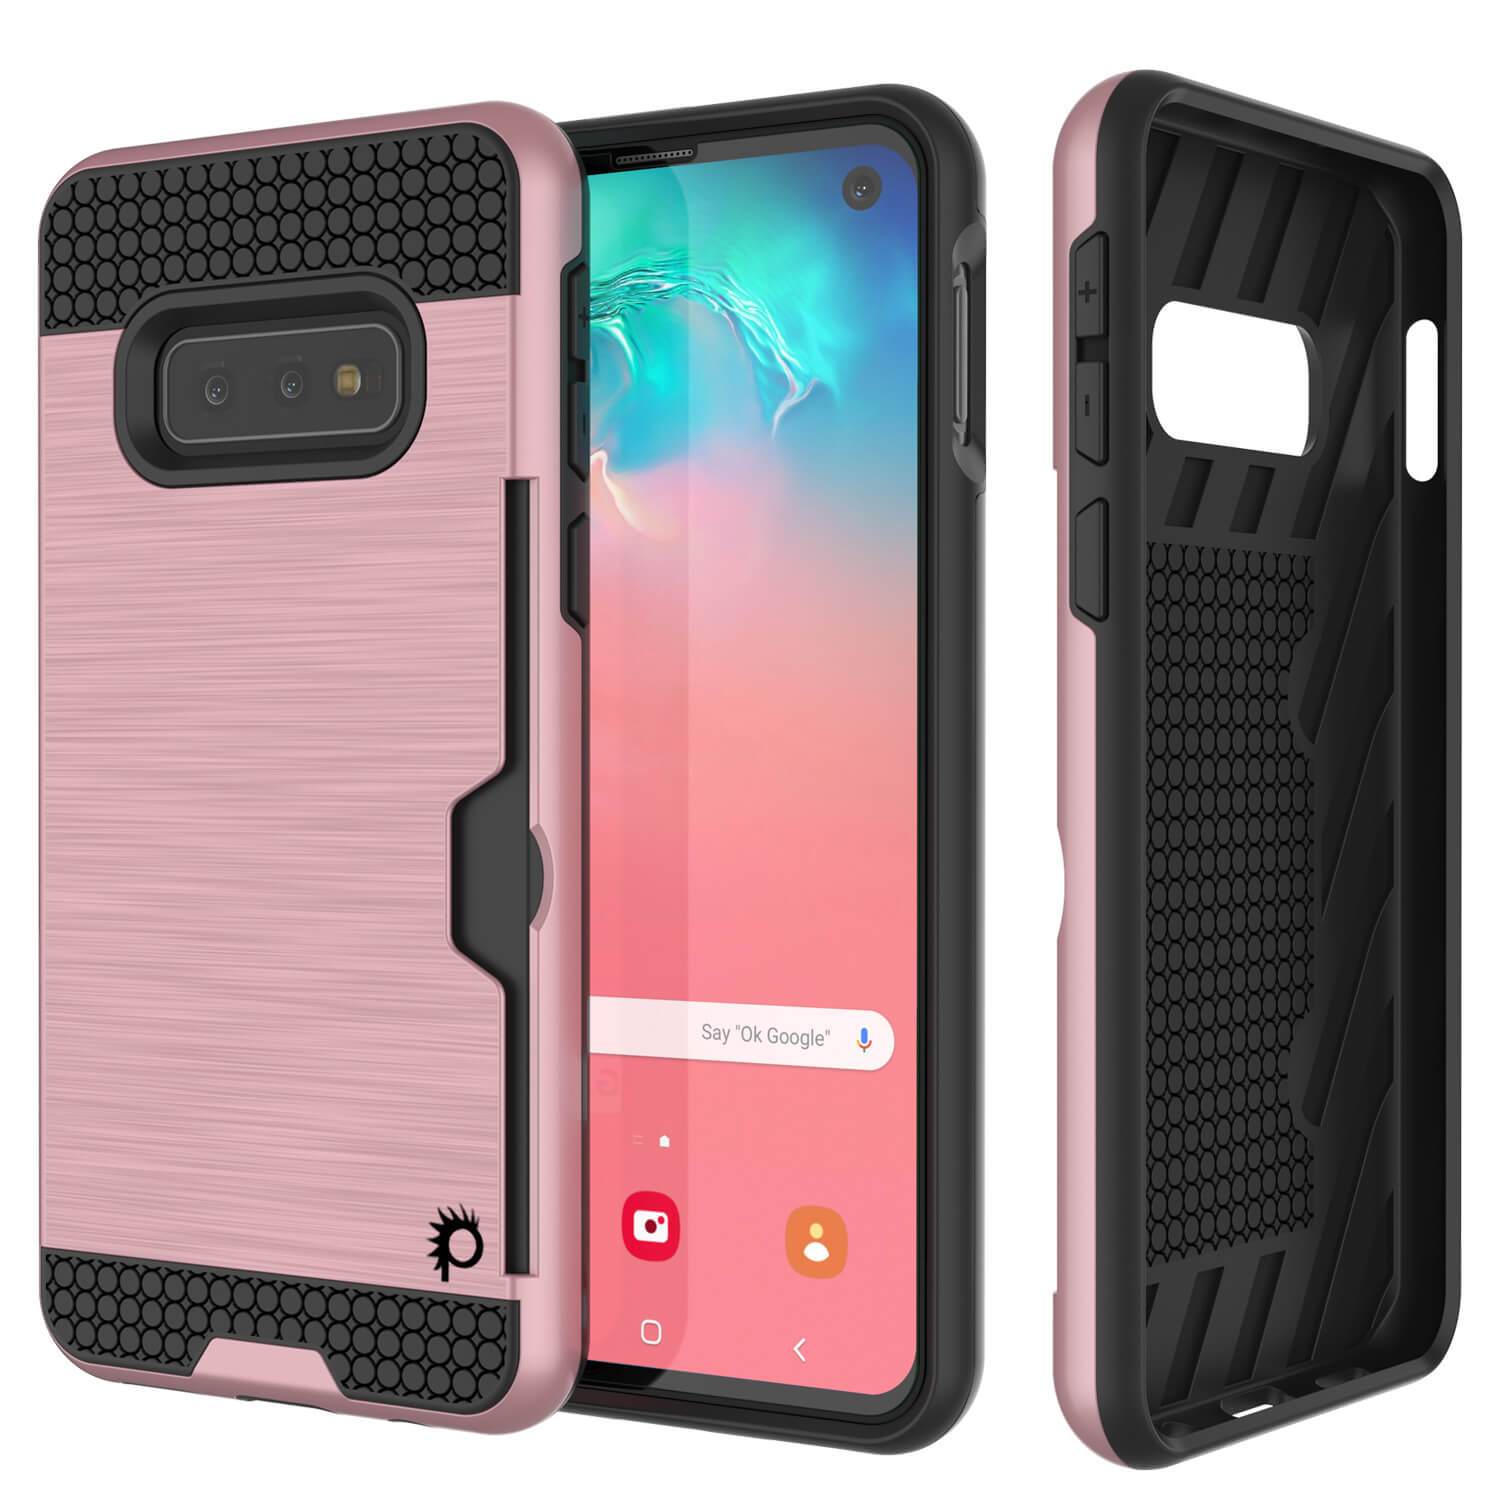 Galaxy S10 Lite Case, PUNKcase [SLOT Series] [Slim Fit] Dual-Layer Armor Cover w/Integrated Anti-Shock System, Credit Card Slot [Rose Gold]